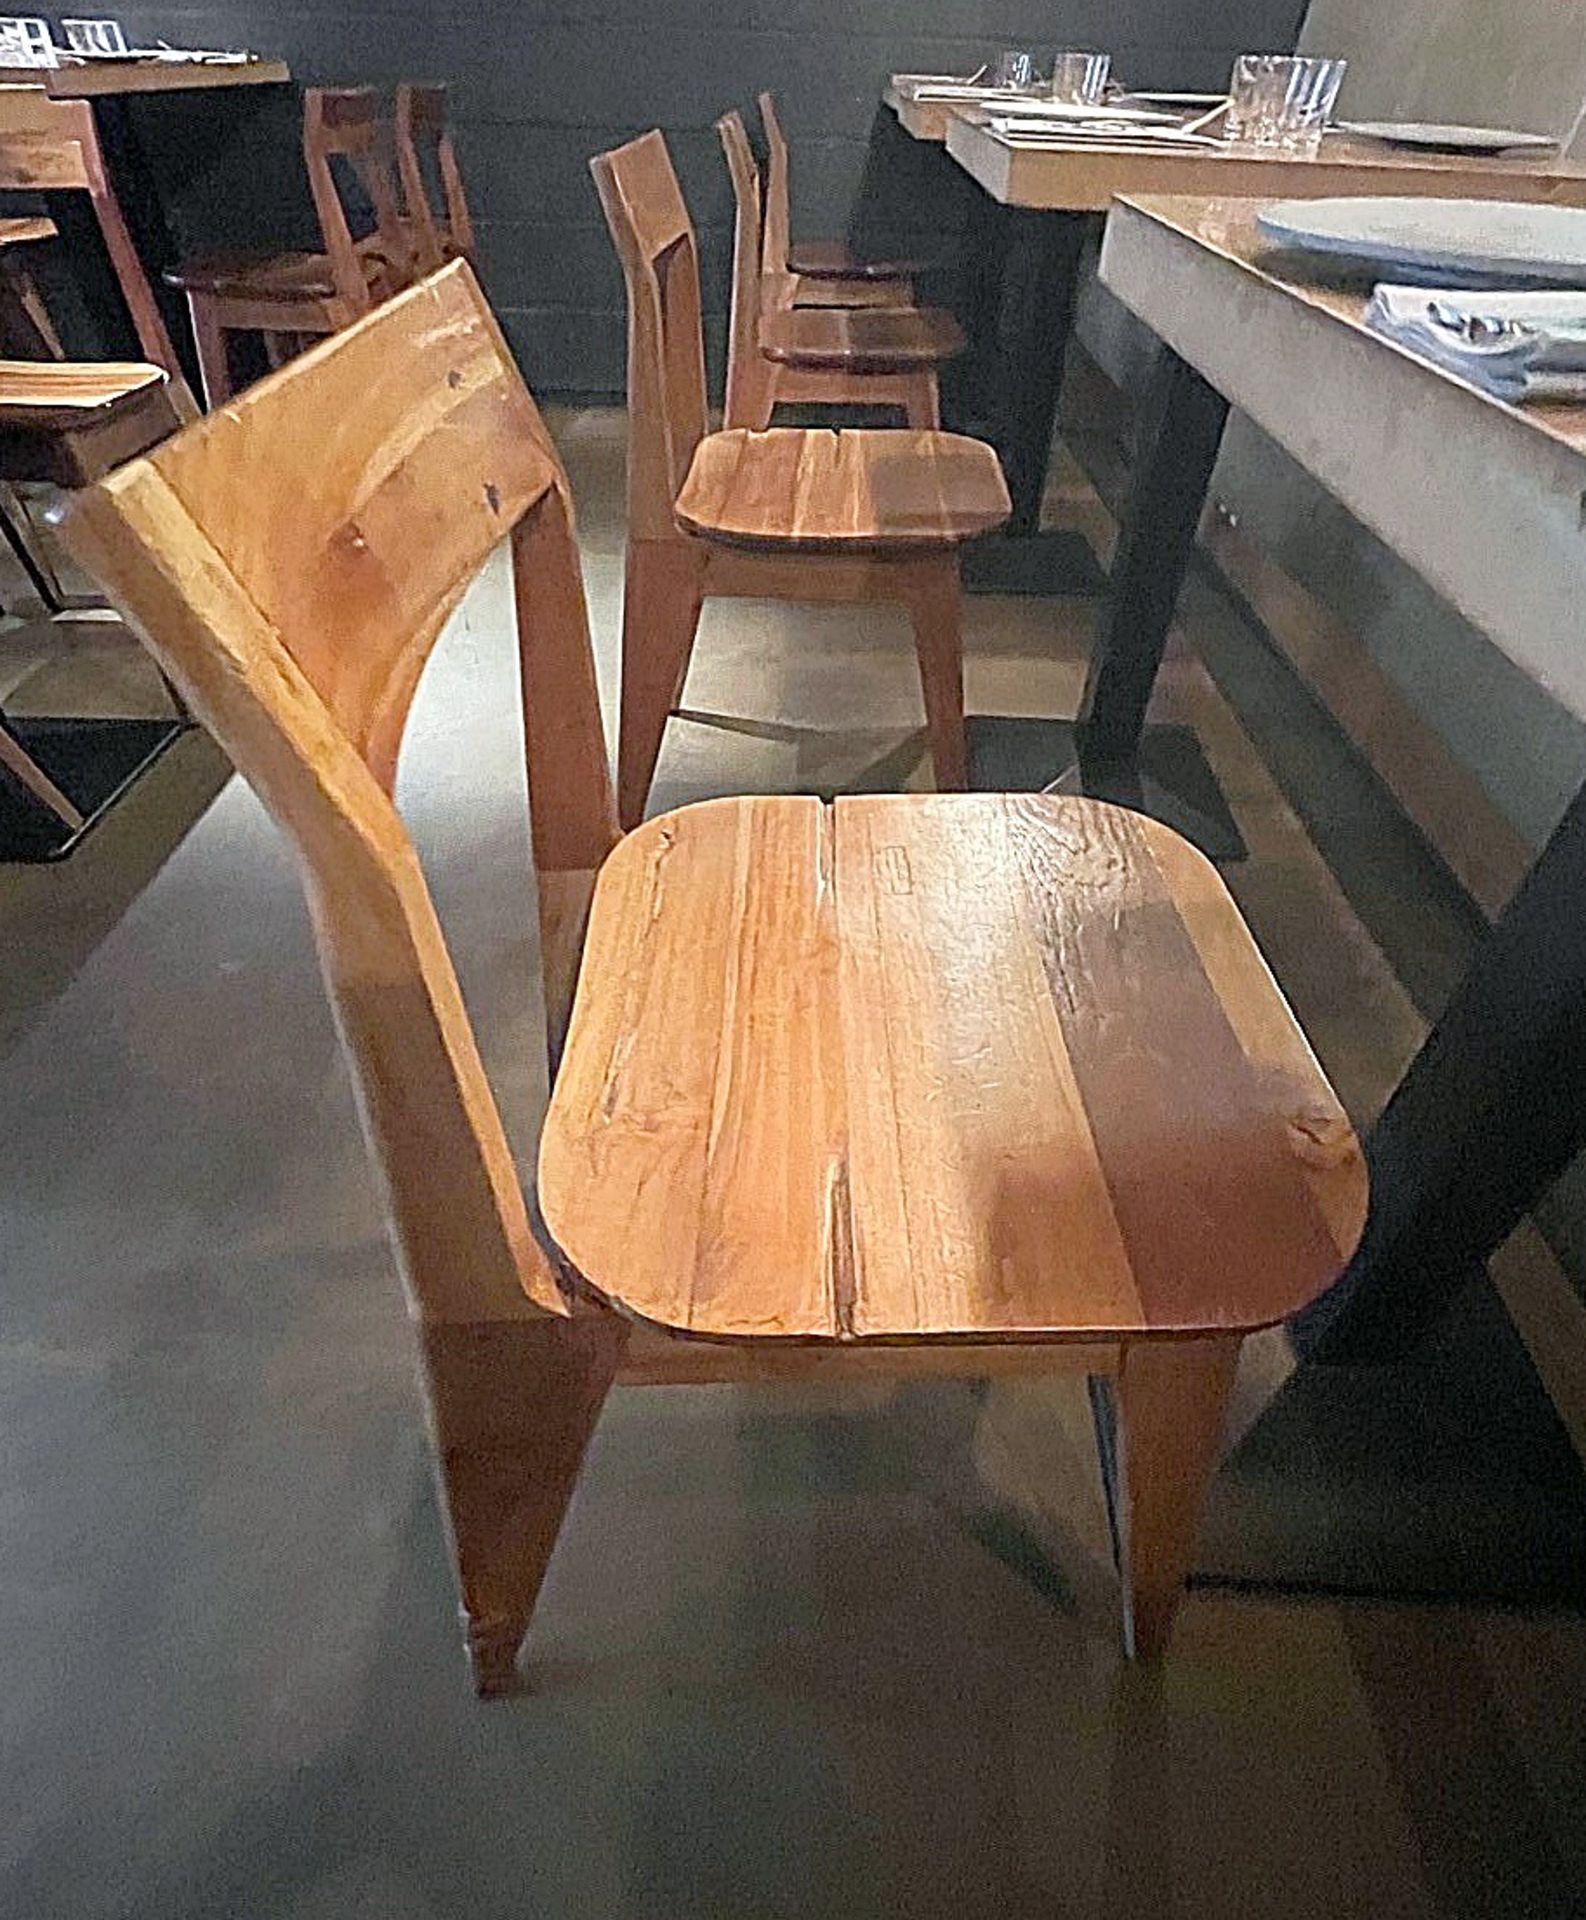 12 x Solid Wood Bistro Bar Dining Chairs - Ref: MAN141 - CL677 - Location: London W1F